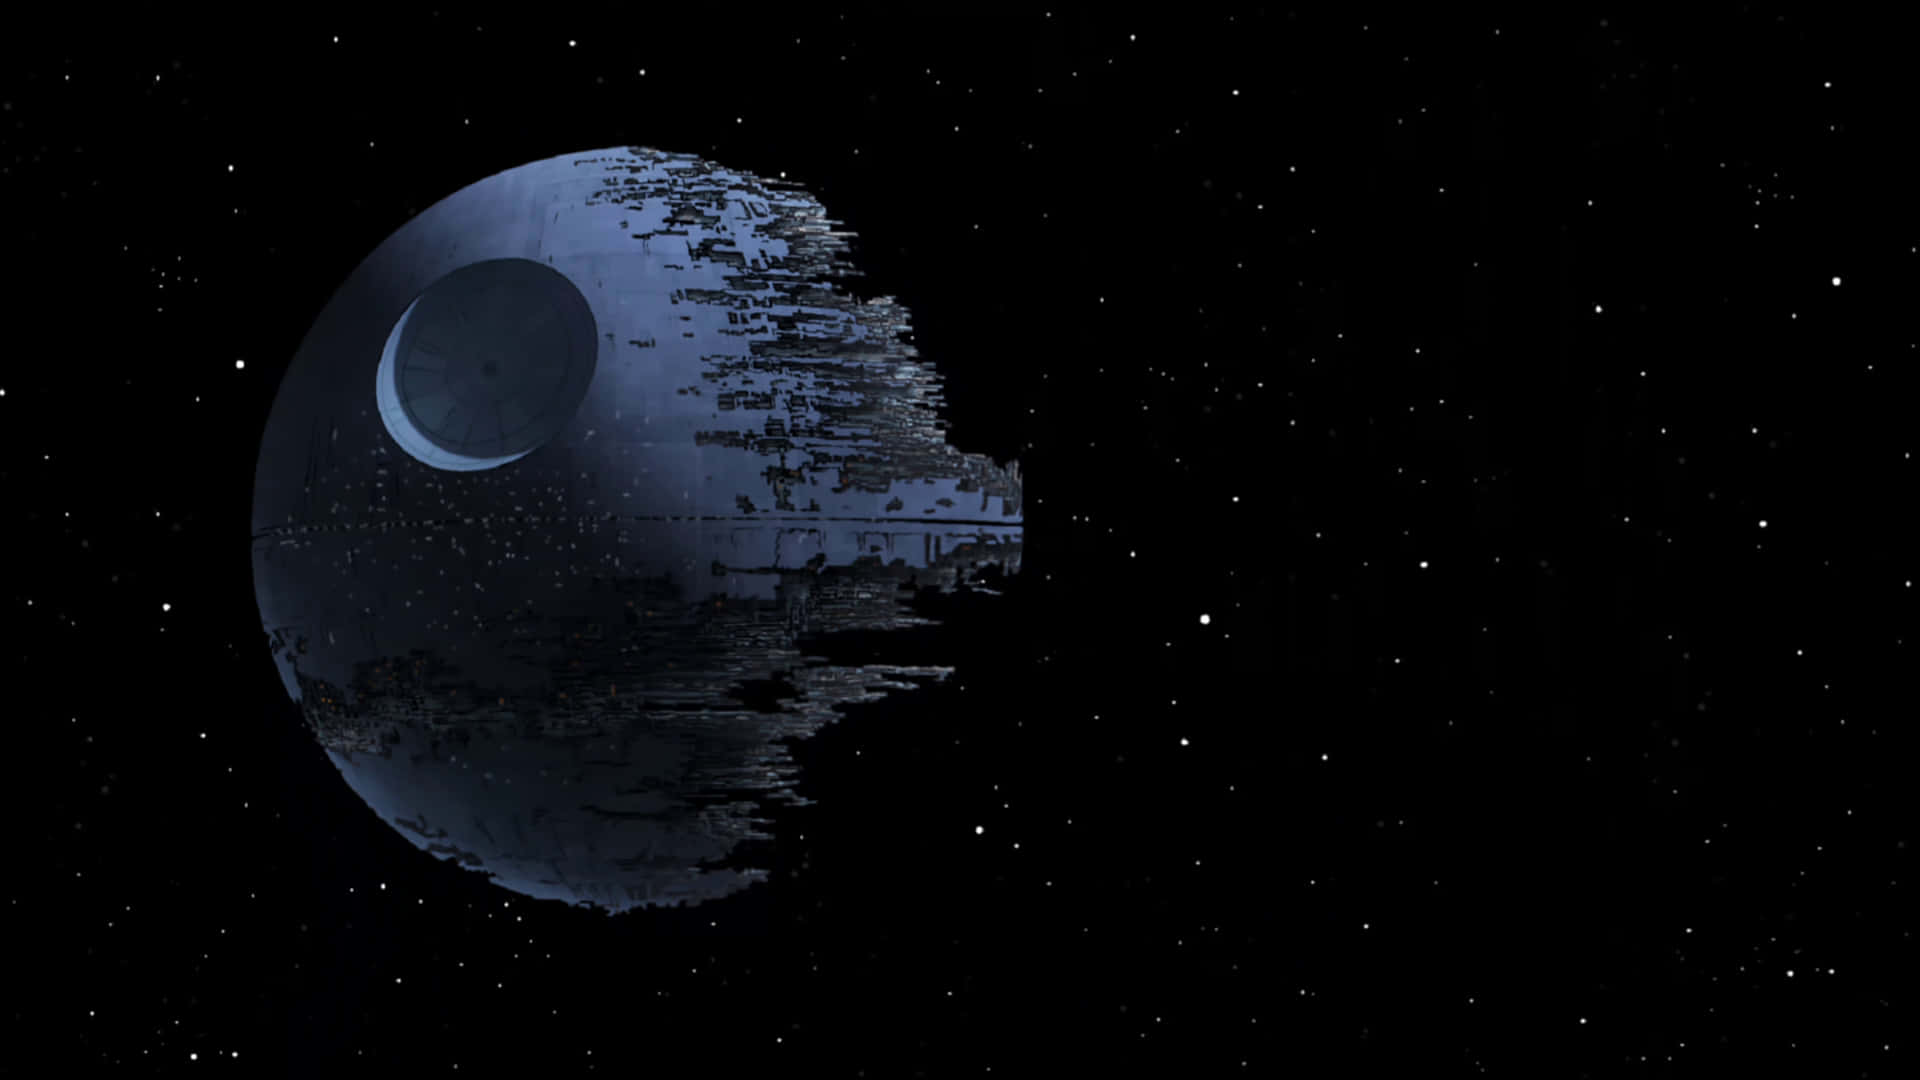 The Epic Empire: The Iconic Death Star